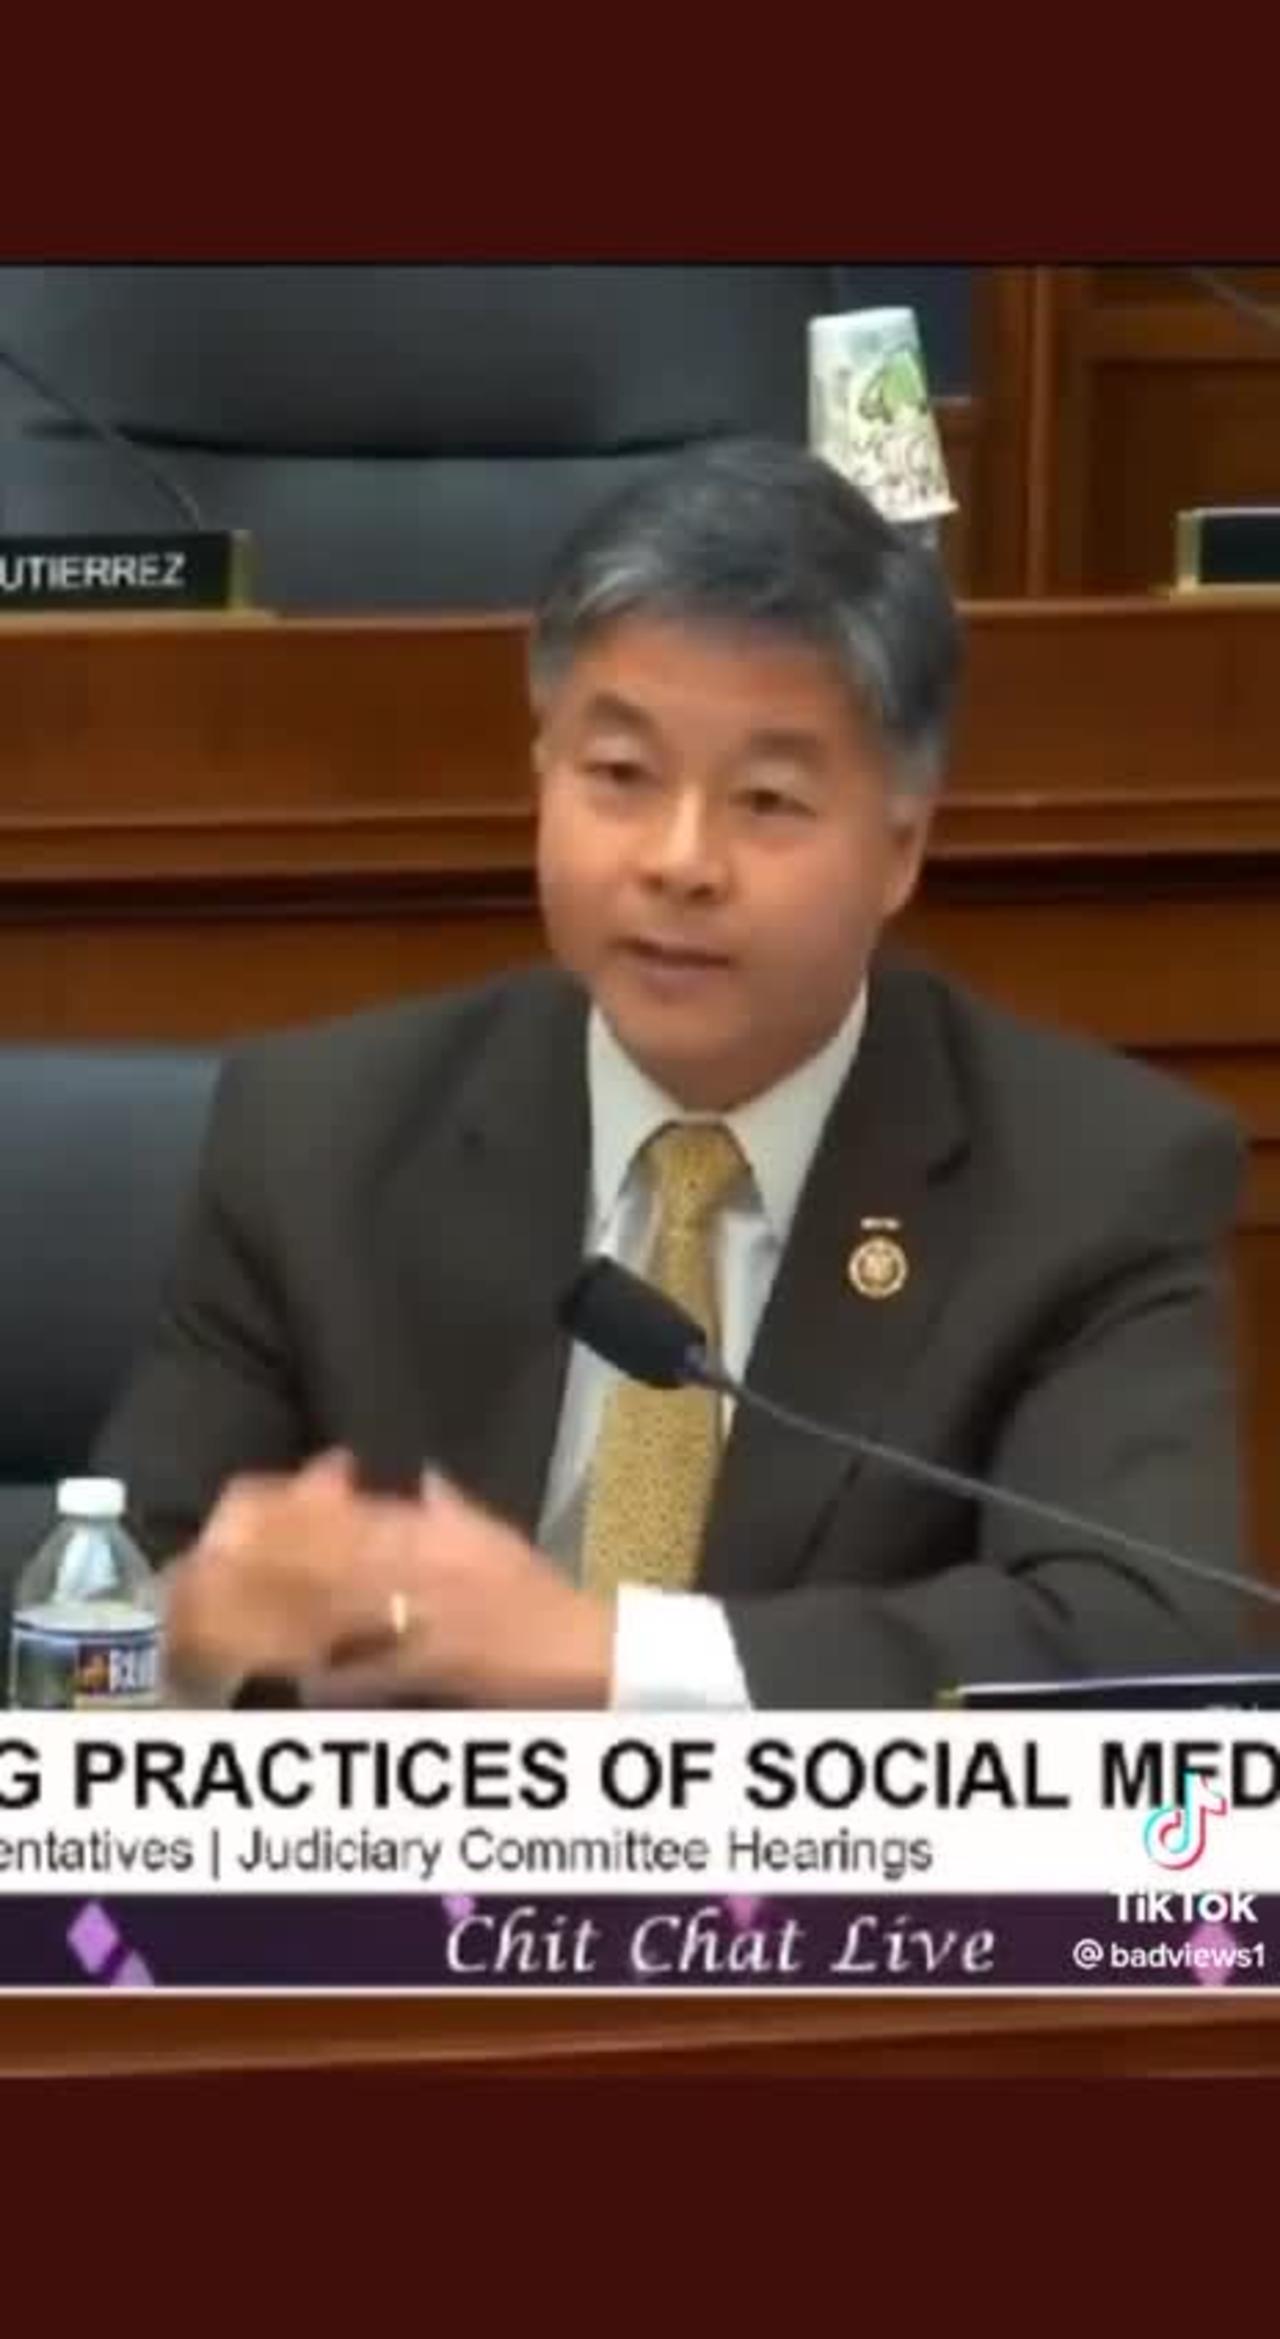 Hey Ted Lieu, is this you?